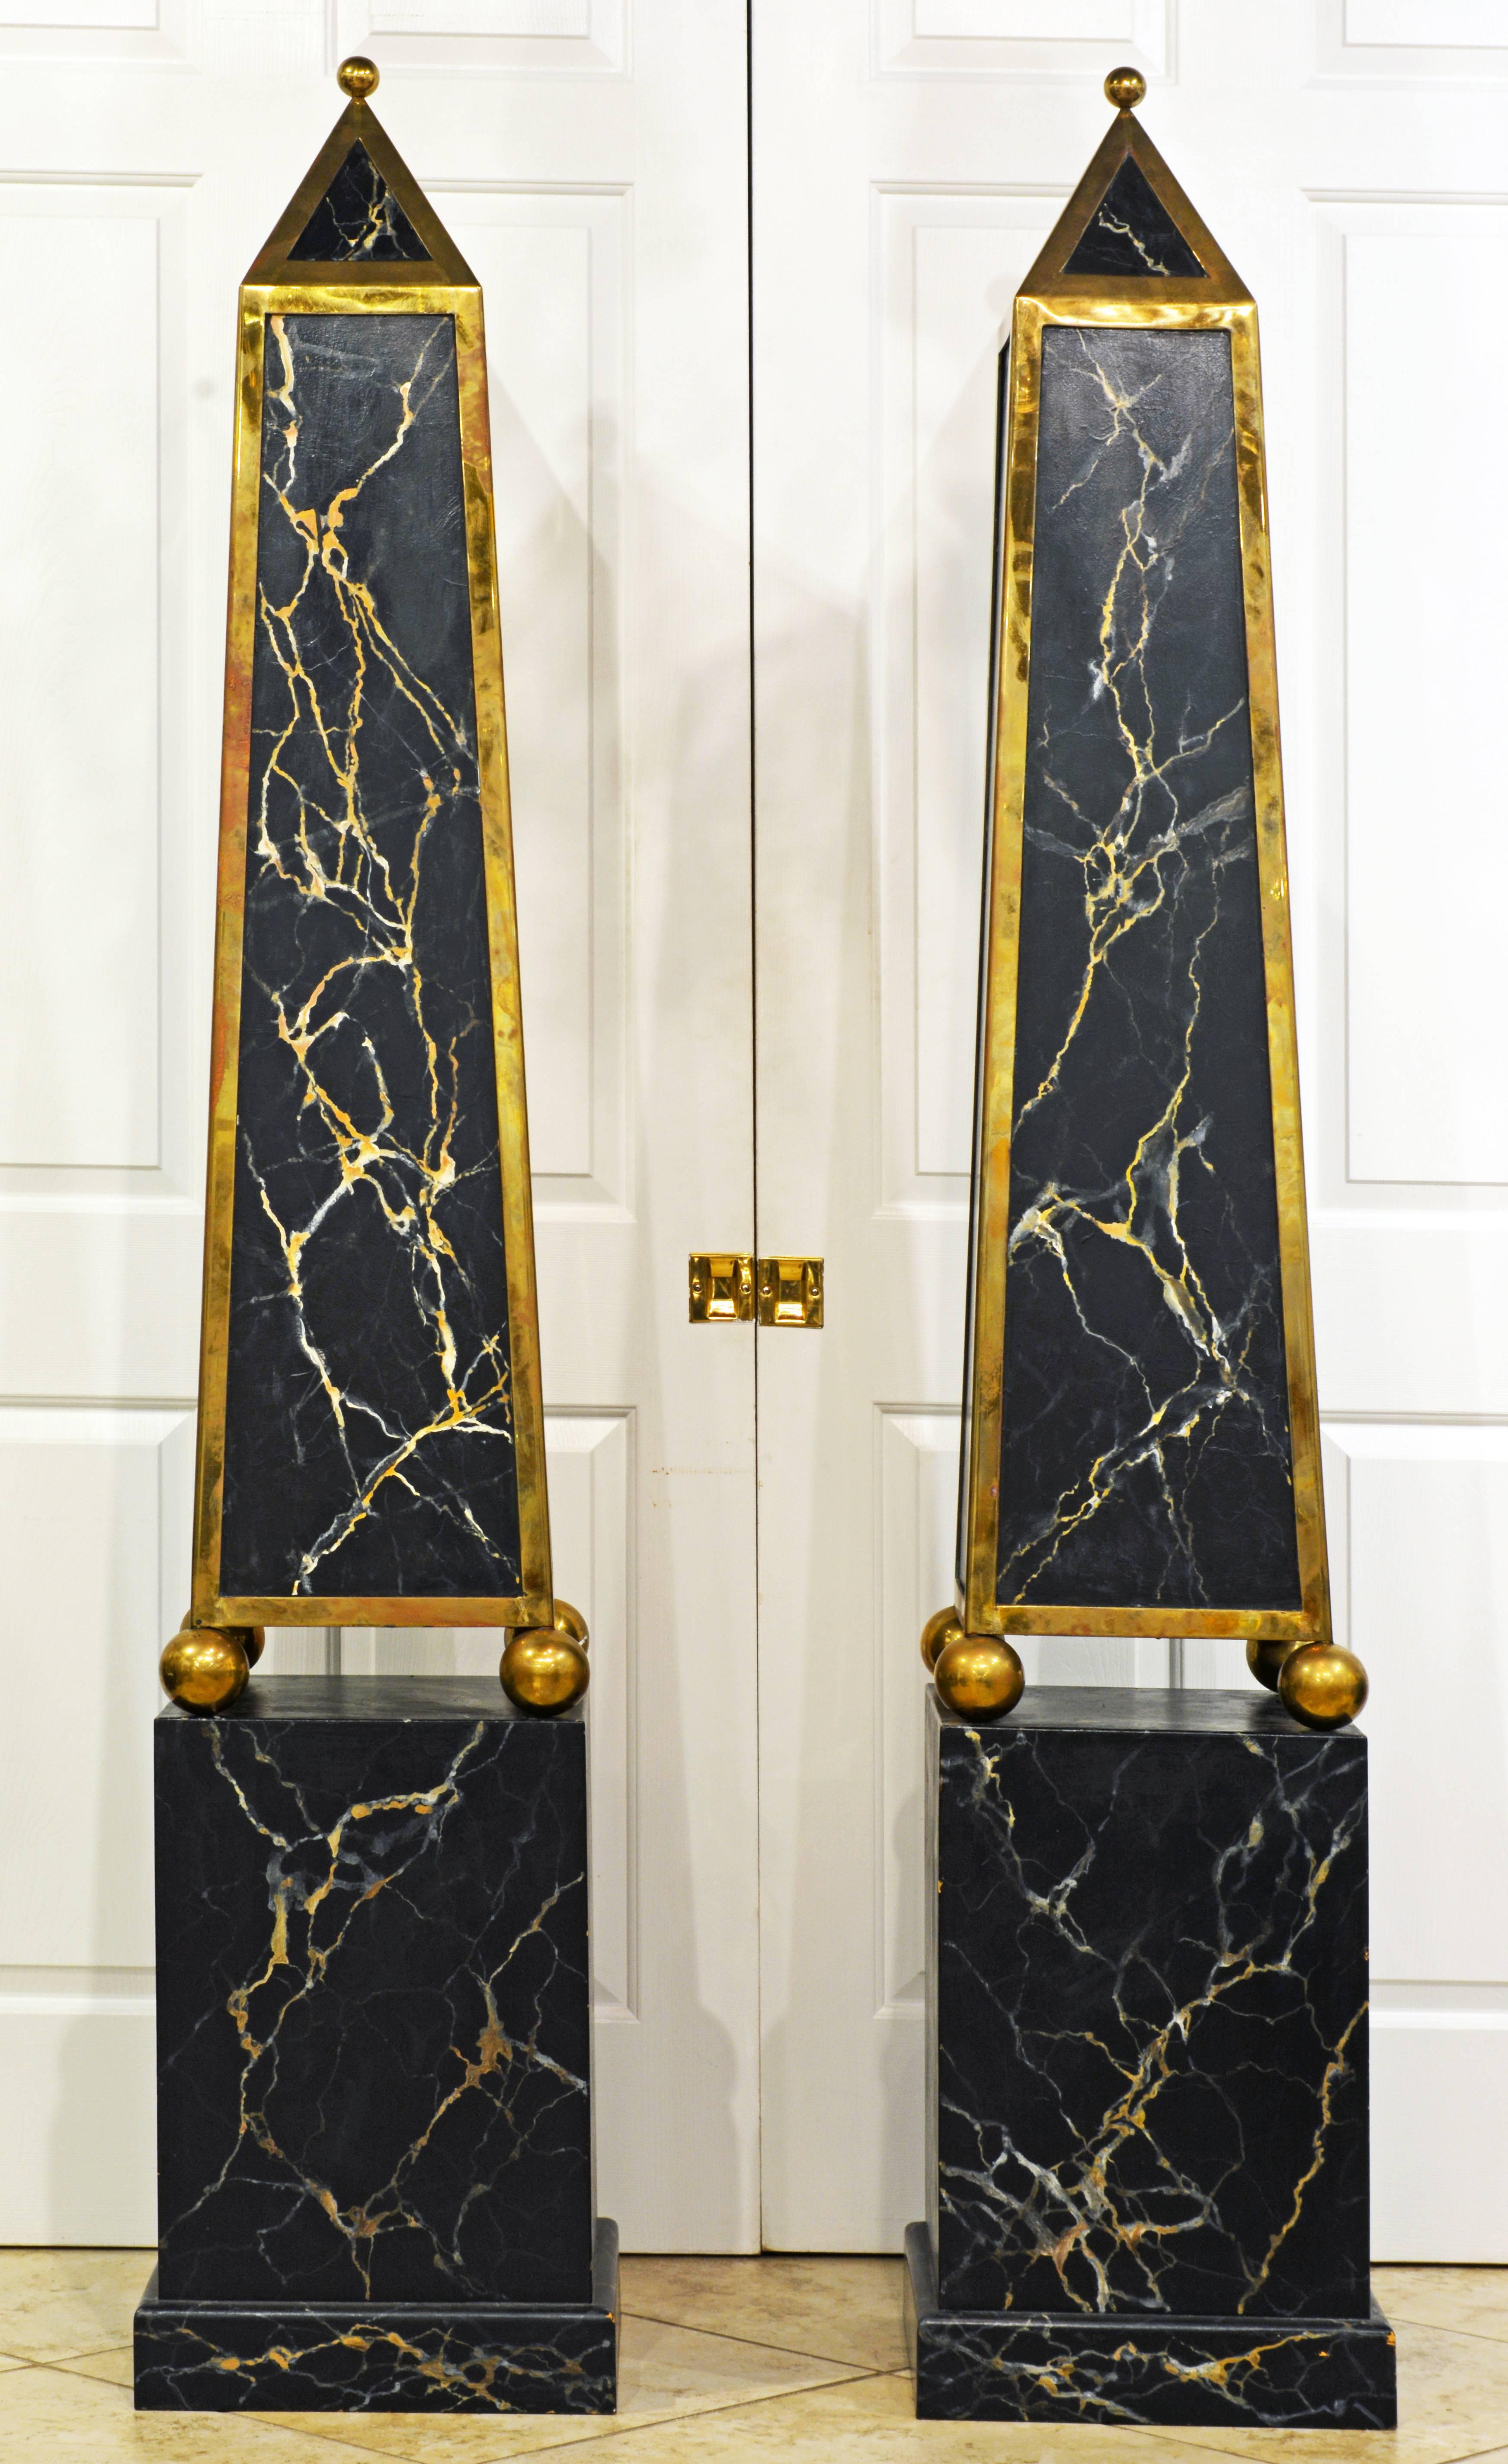 Standing an impressive 81 inches tall these magnificent obelisk models feature upper solid brass mounted and marble painted sections surmounted by finials and resting on solid brass spheres on square likewise marble painted bases. Each obelisks has